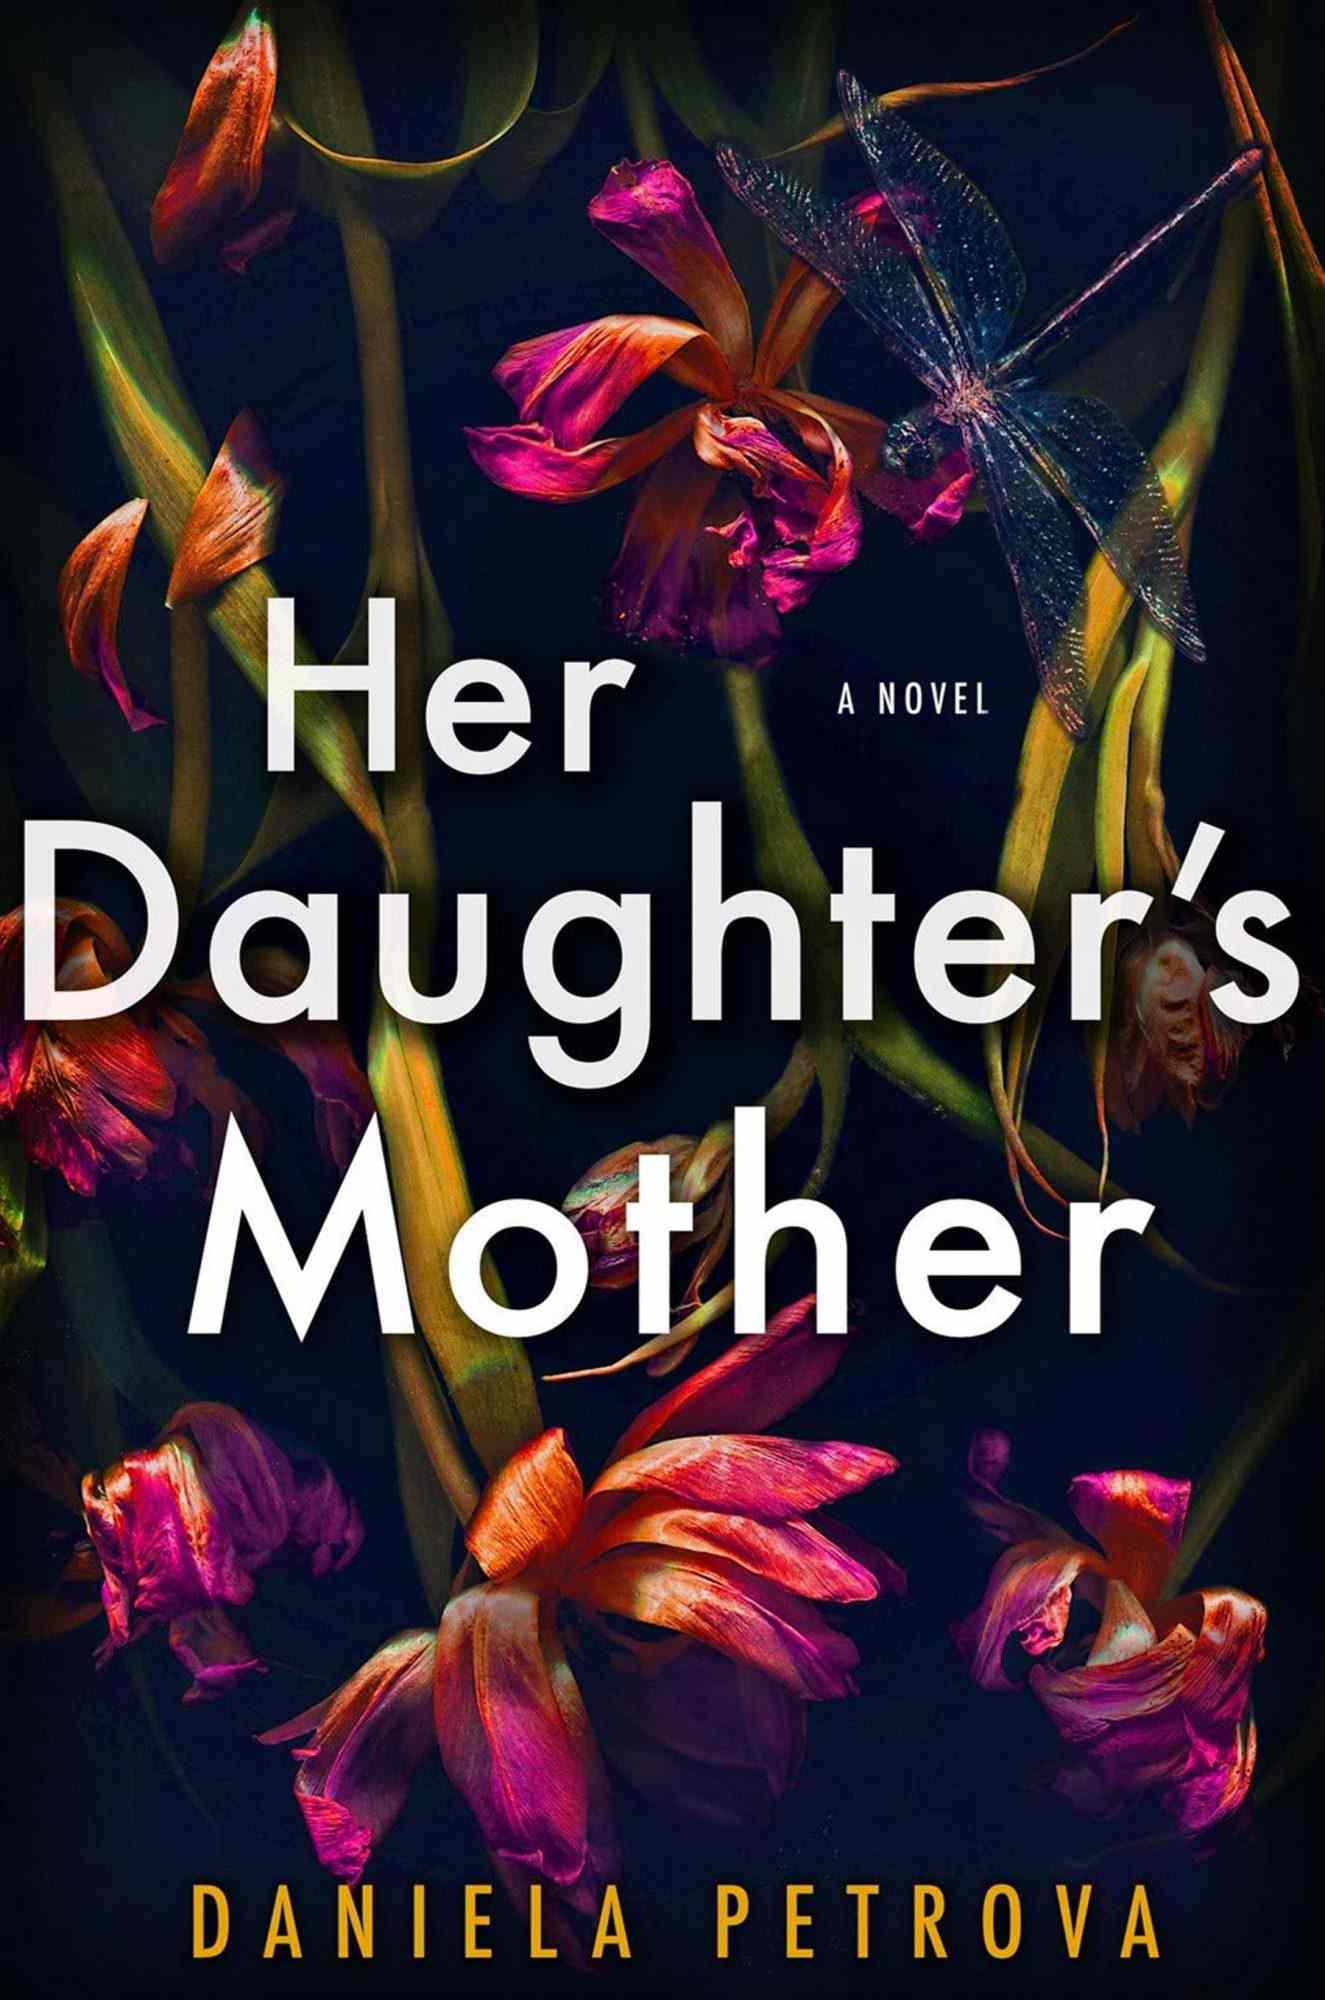 Her Daughter's Mother, by Daniela Petrova